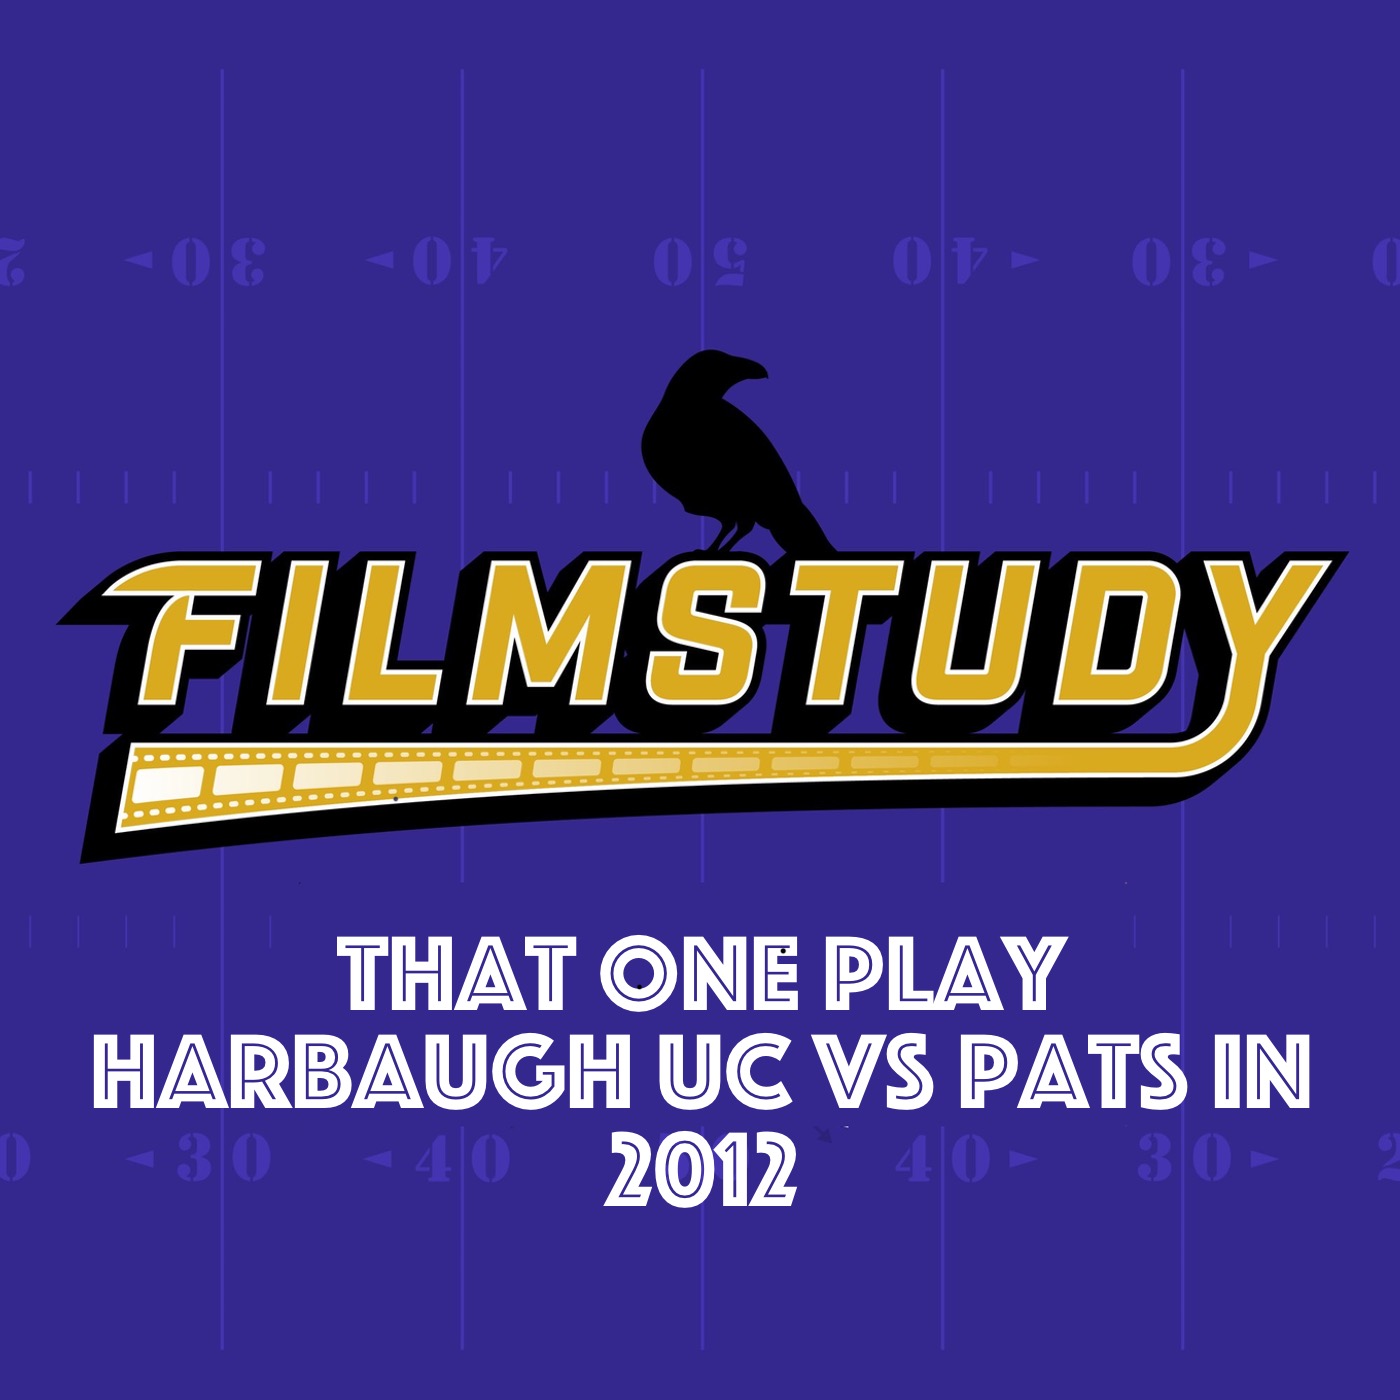 TOP : Harbaugh UC vs Pats in 2012